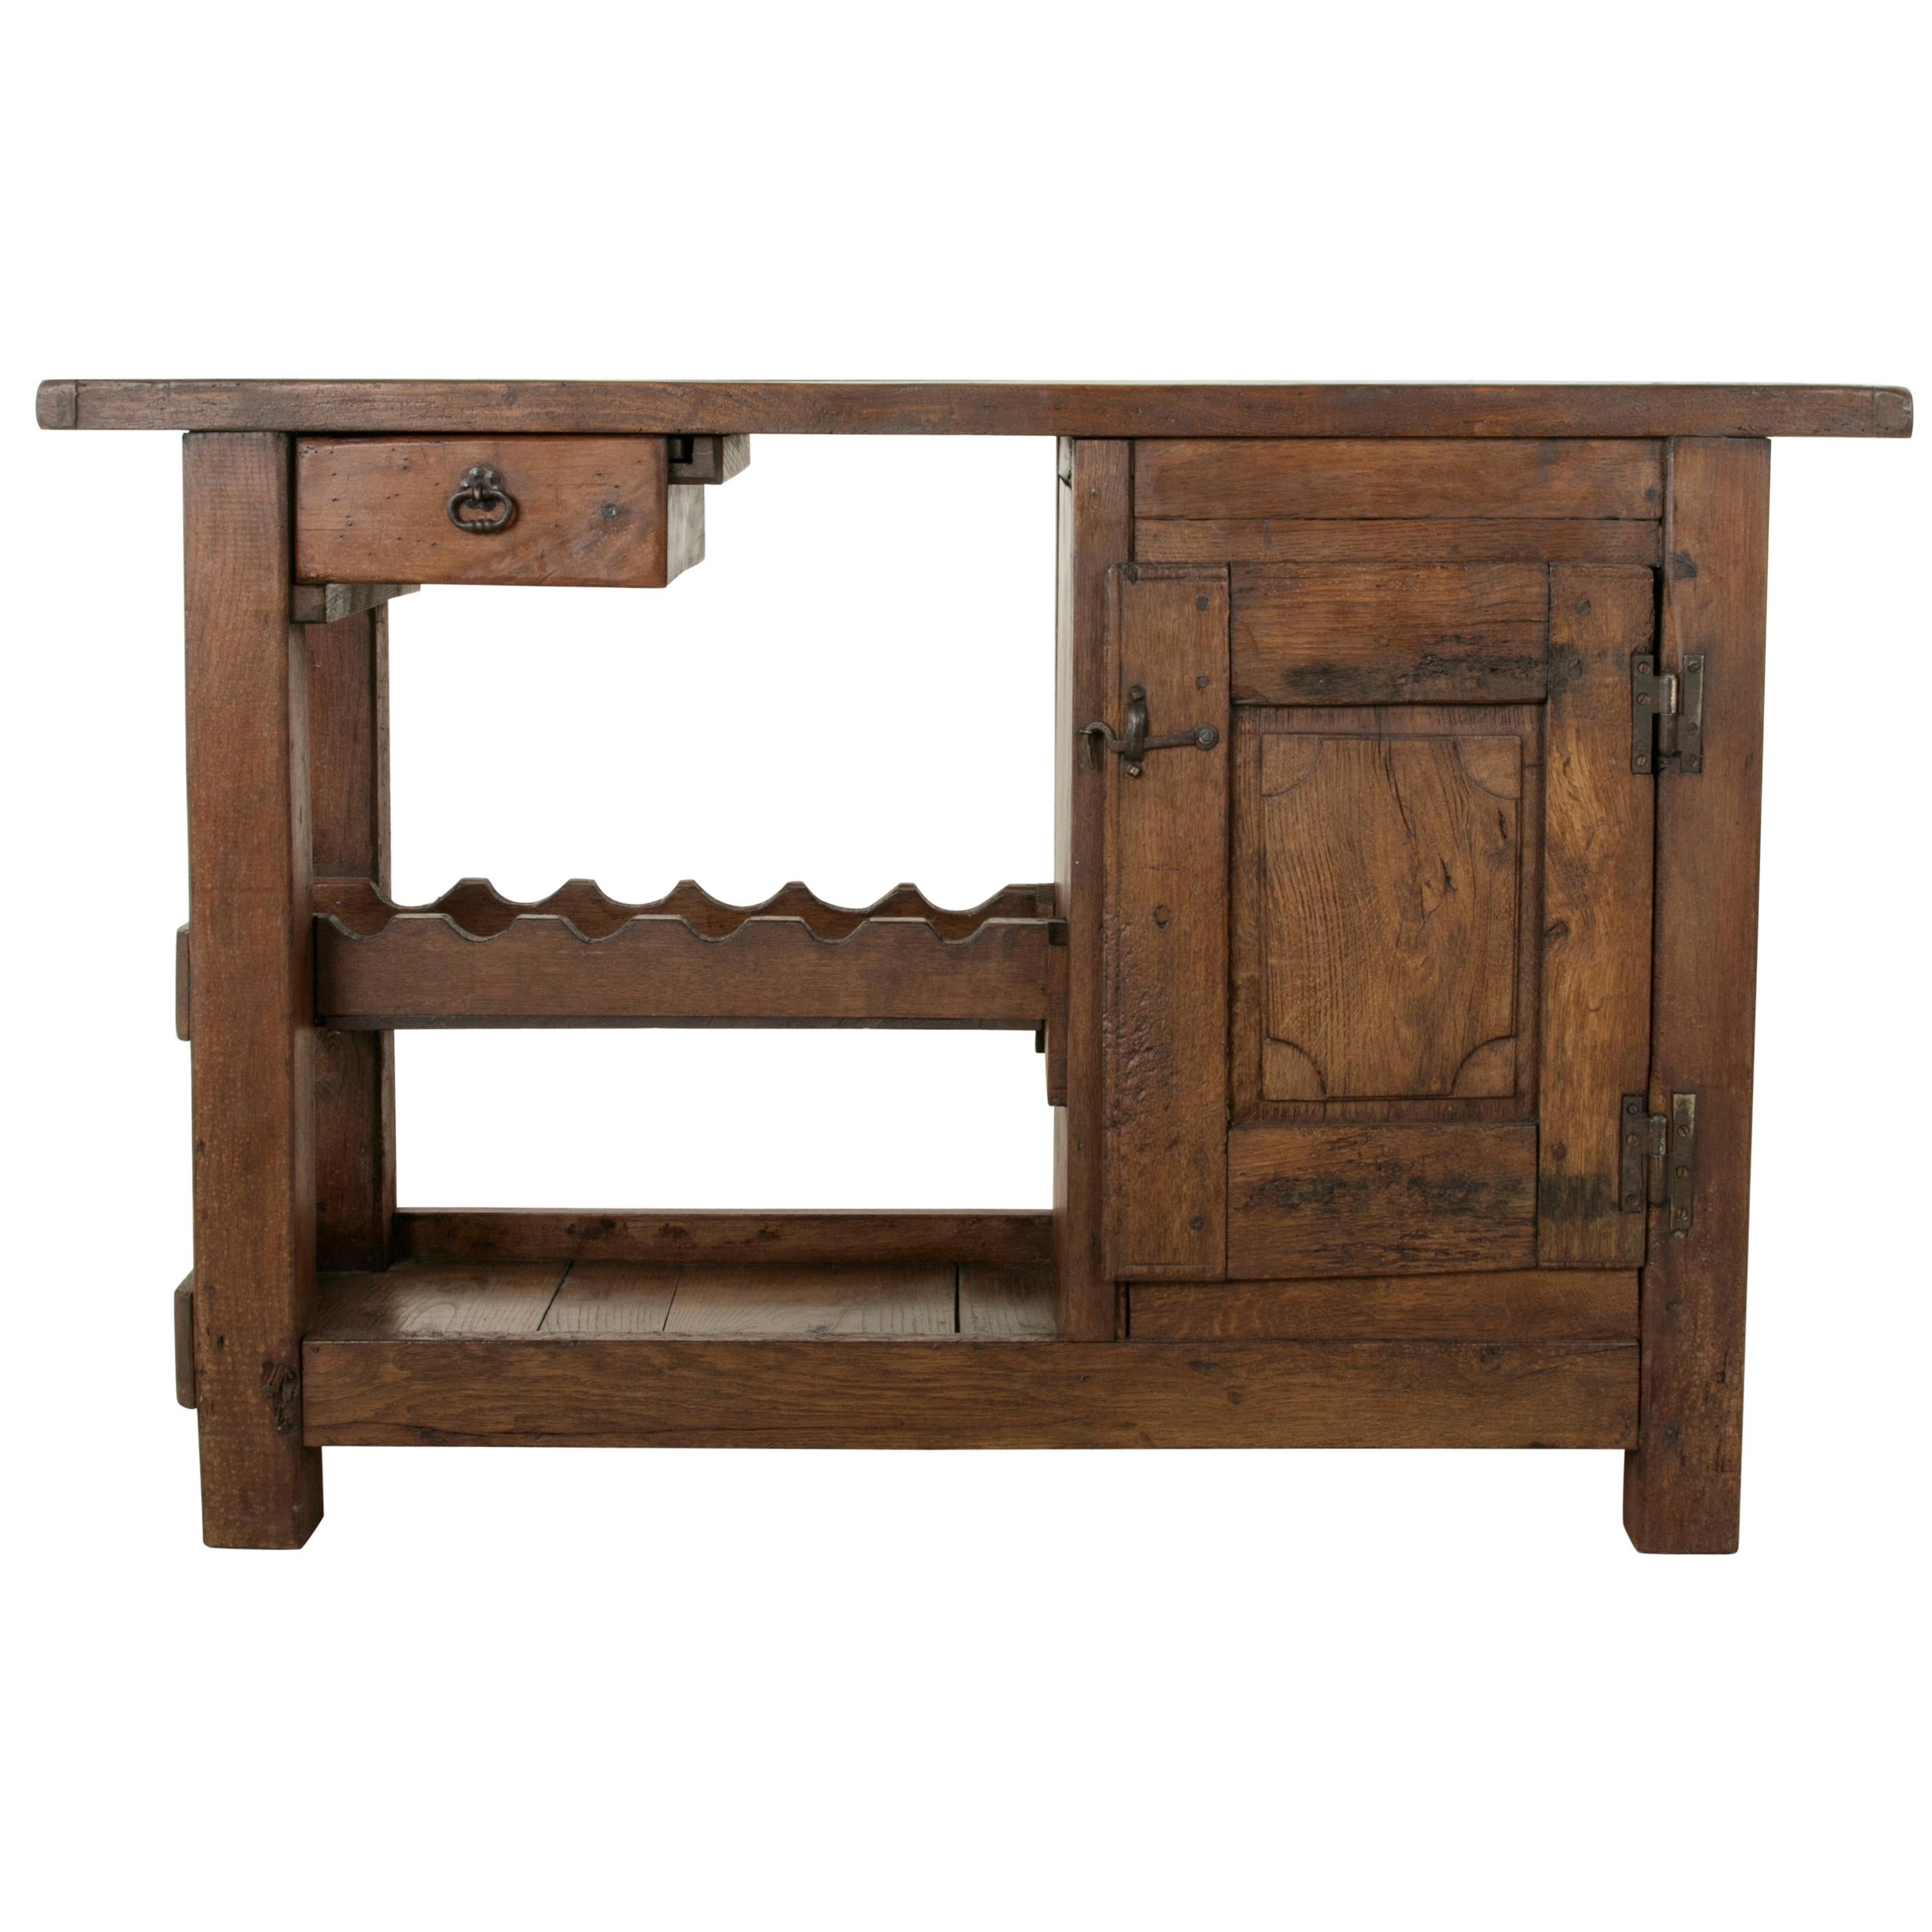 Early 20th Century French Oak Work Bench, Console Table, Sofa Table, Dry Bar